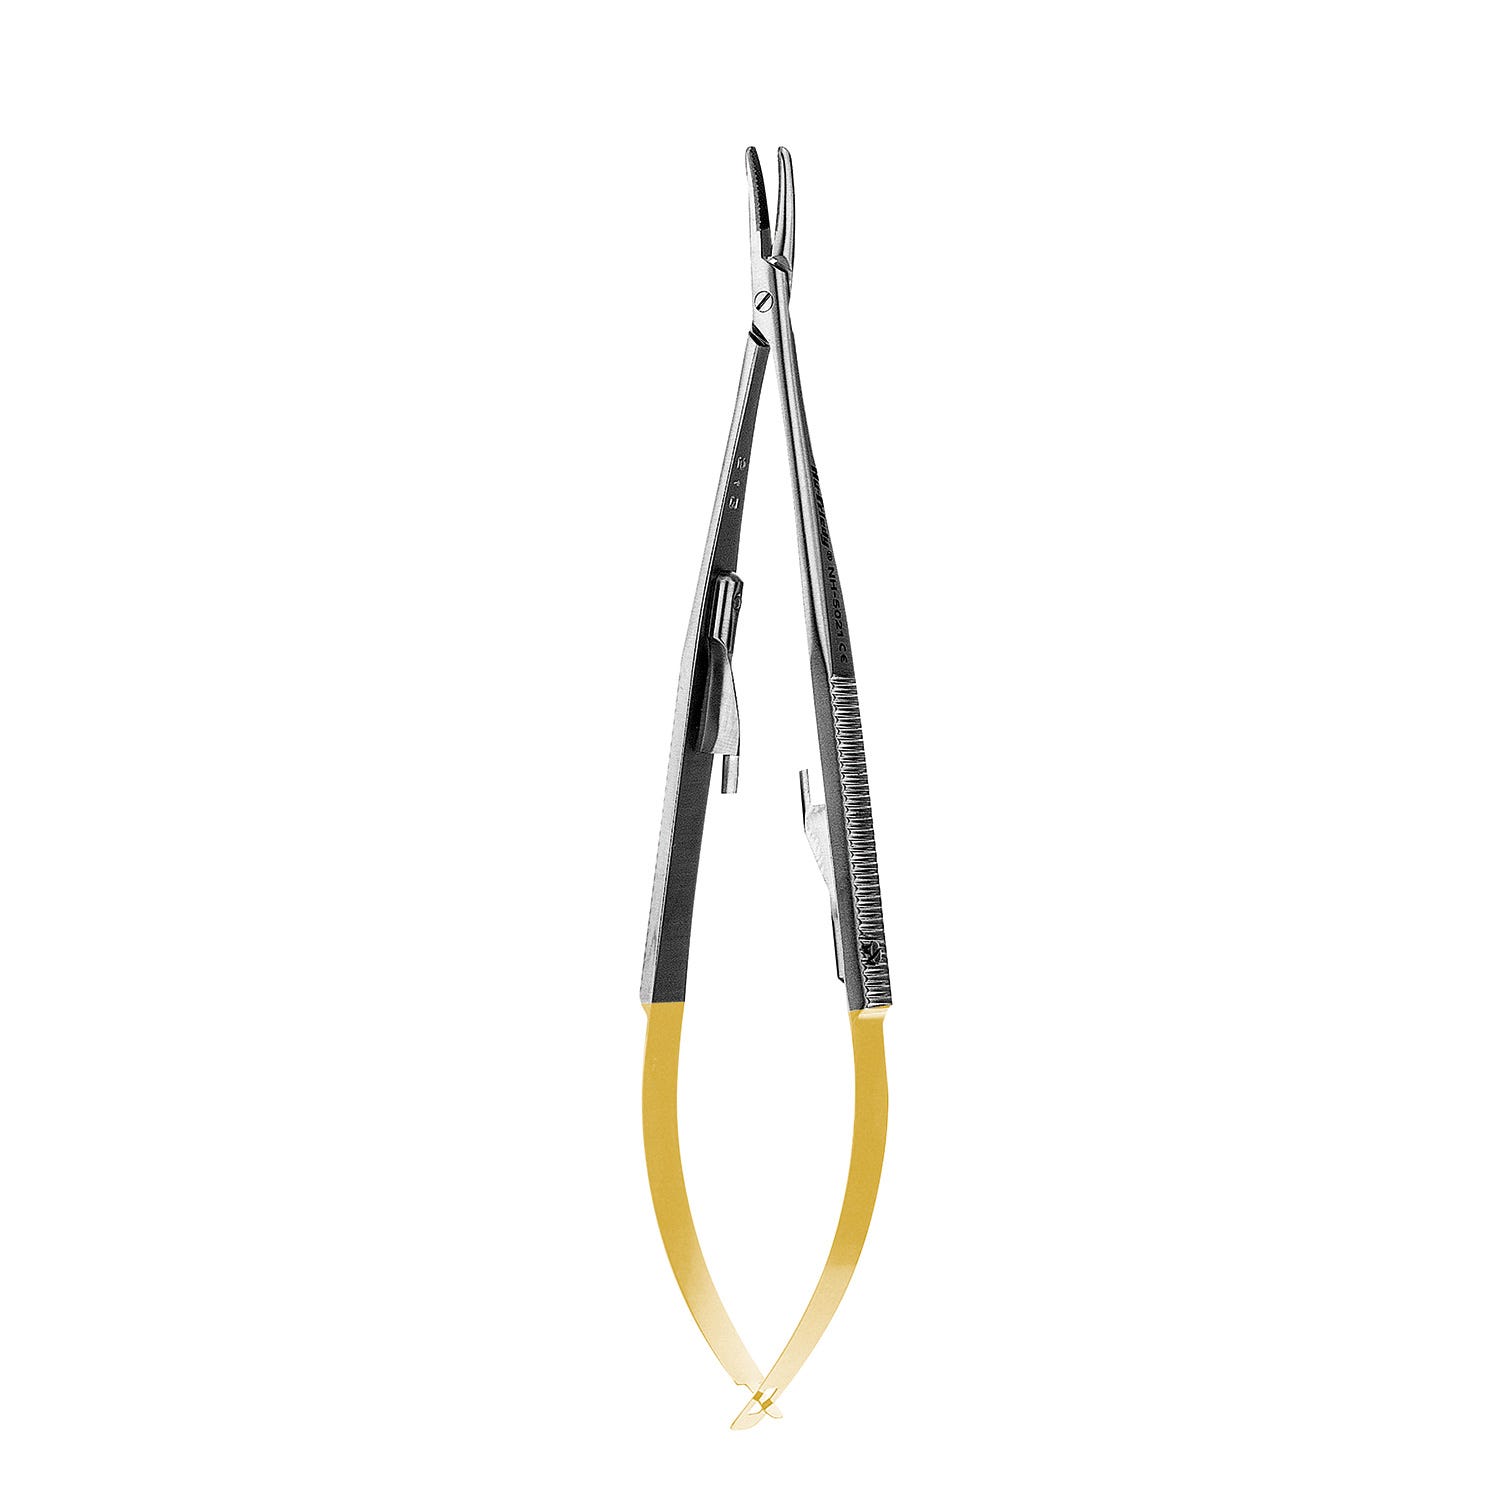 Needle Holder Castroviejo TC Curved, Serrated